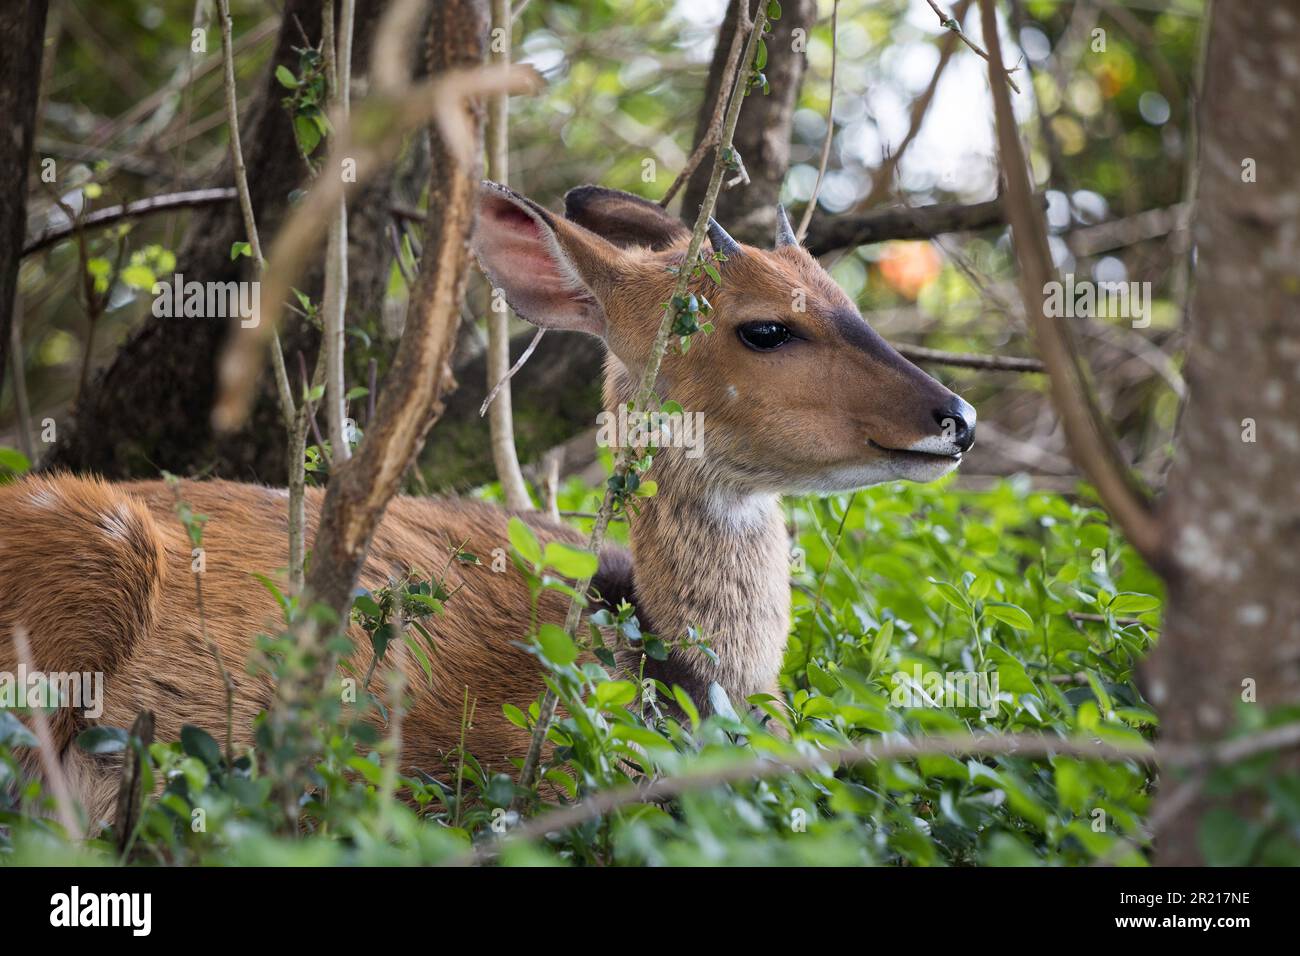 A bushbuck, or antelope laying down hidden in the thicket on the floor of the forest Stock Photo